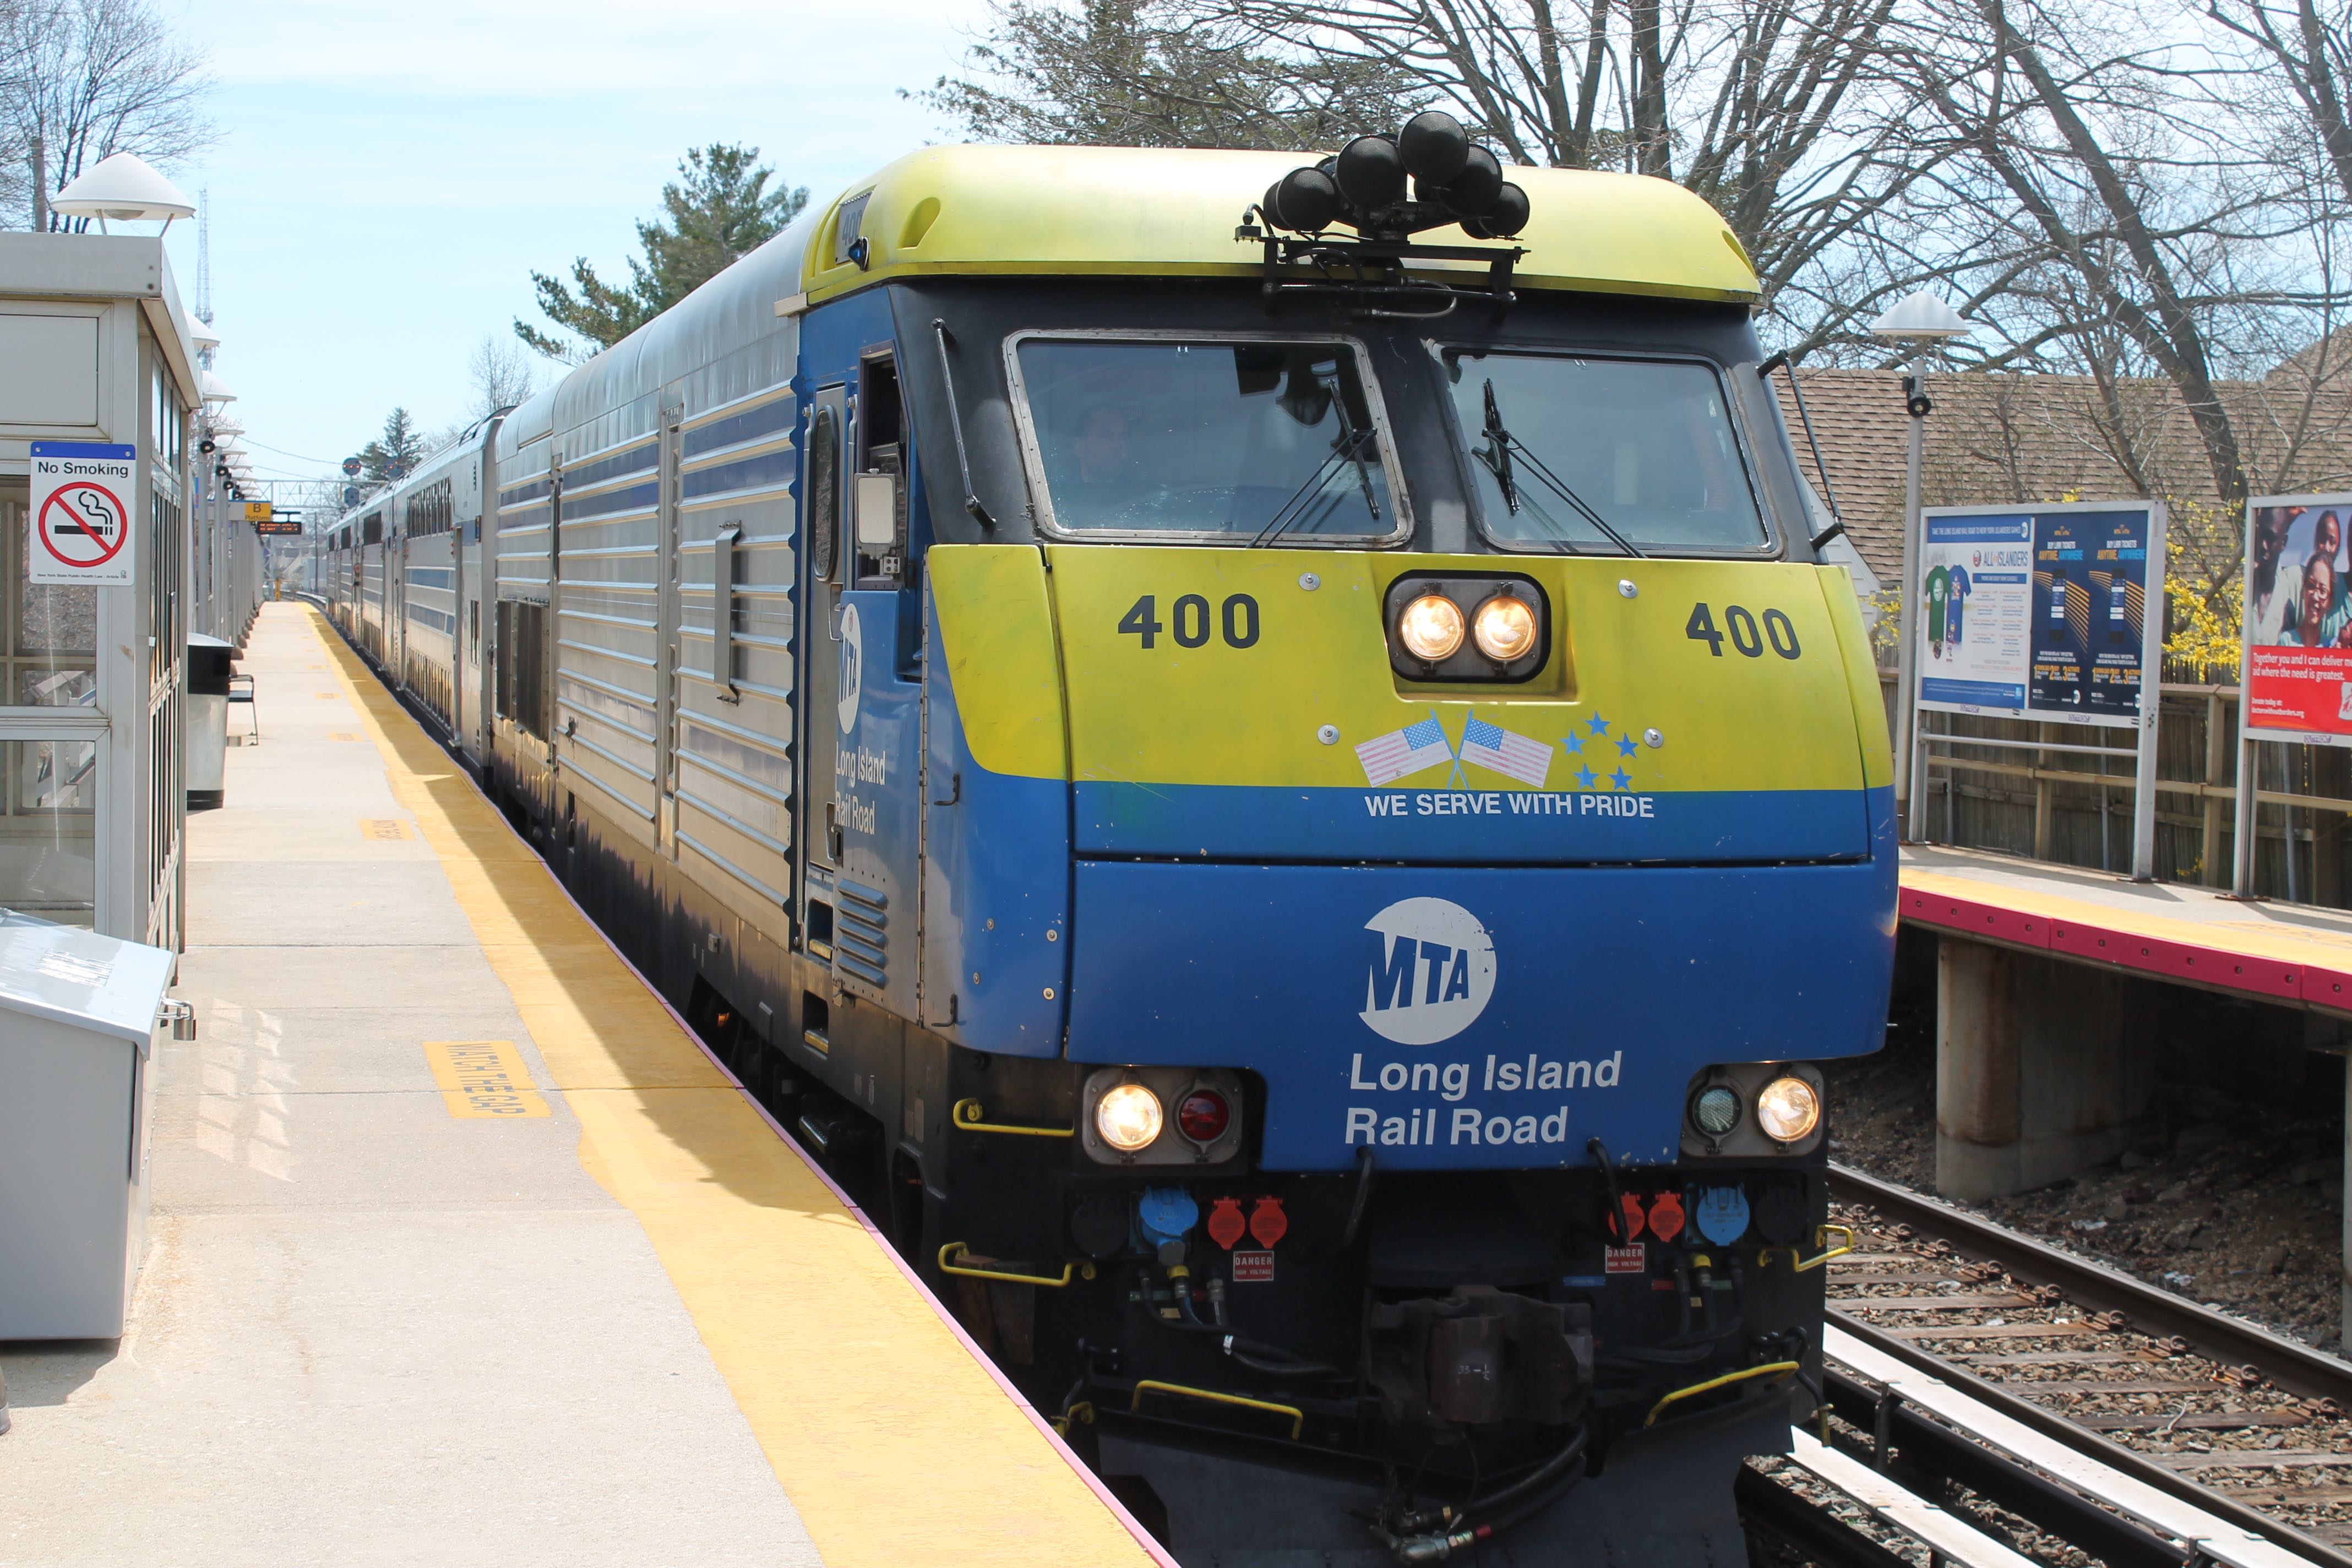 LIRR delays understated, cost $60M in productivity: comptroller